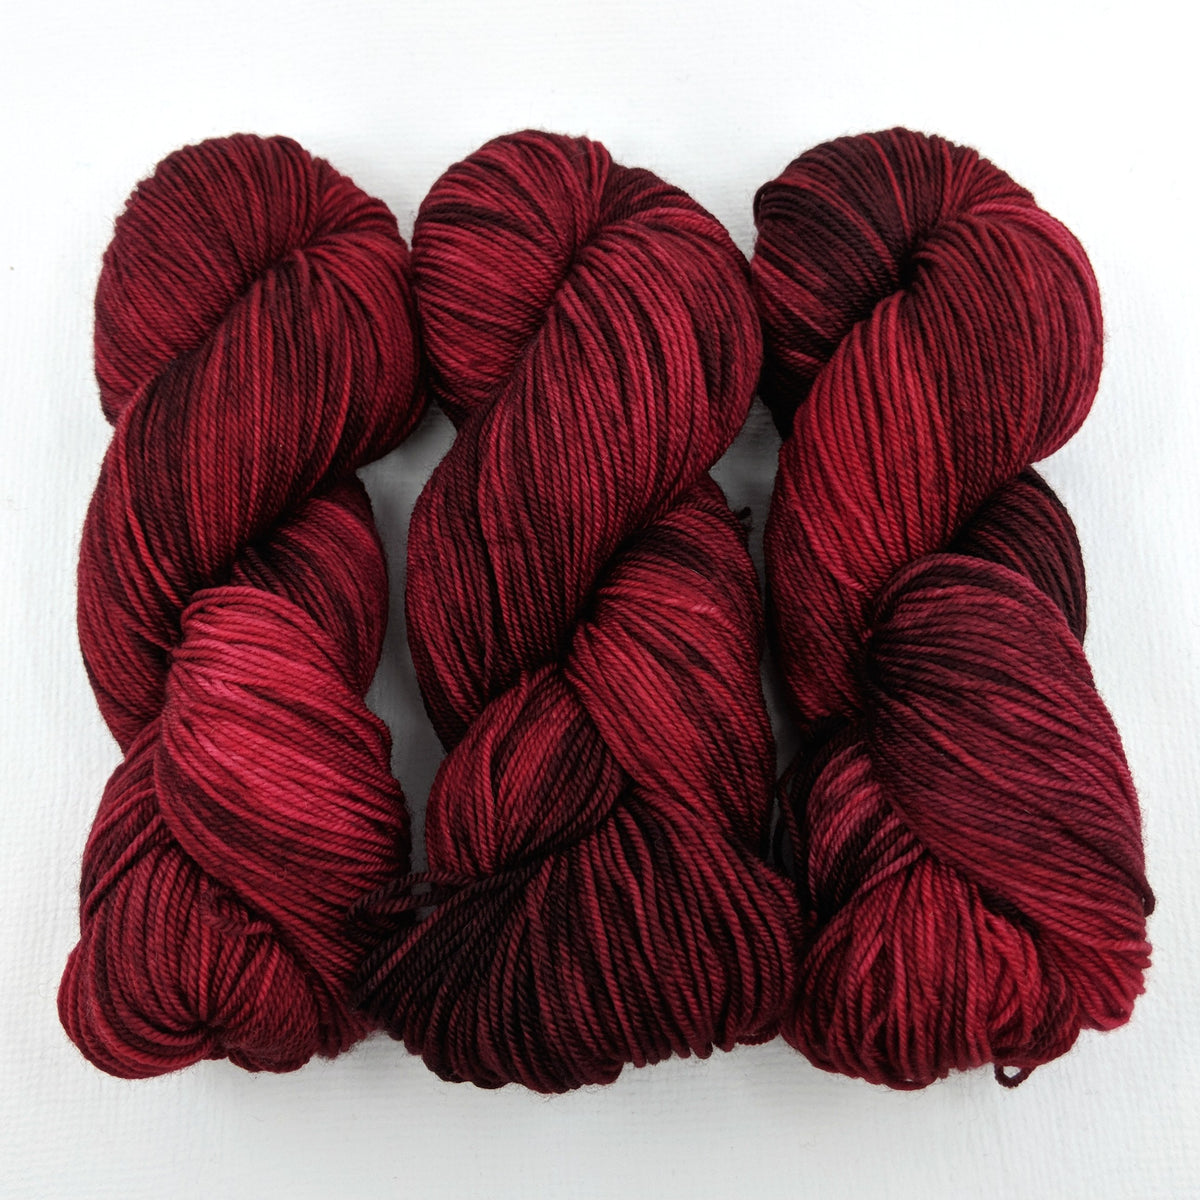 Syrah by Moonlight - Revival Worsted - Dyed Stock